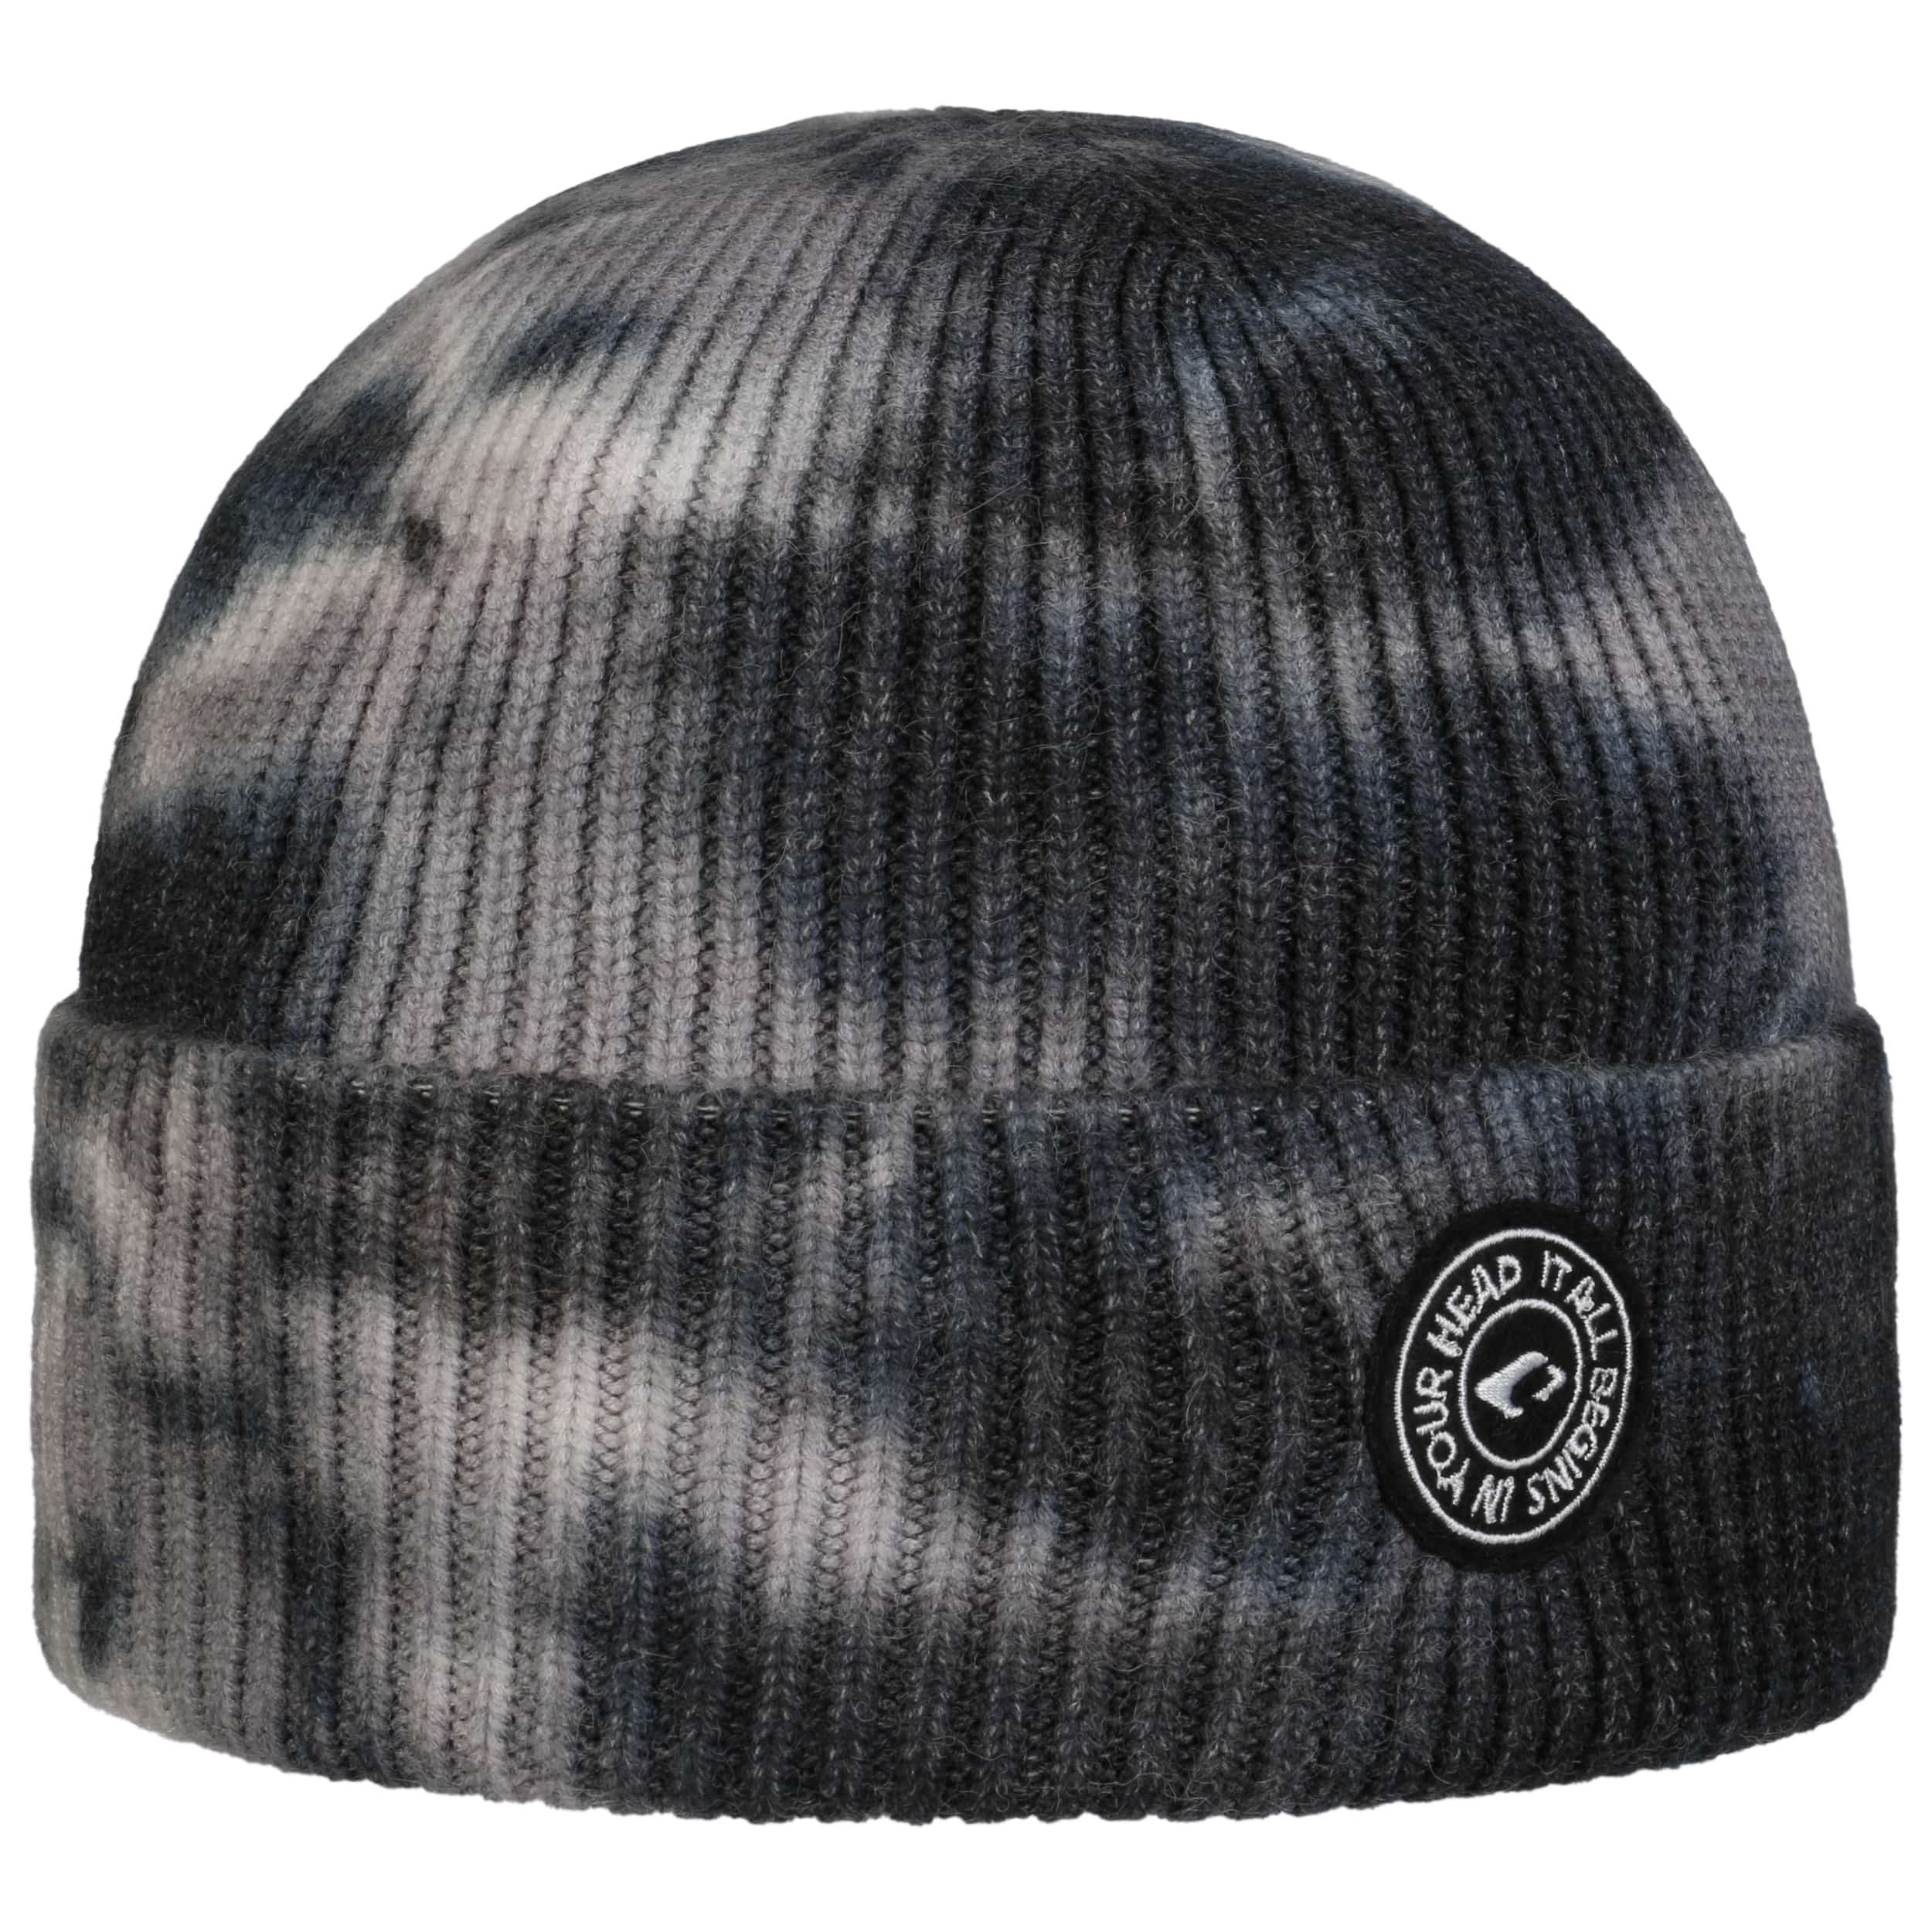 28,95 - Hat by Chillouts € Yuna Tie Beanie Dye